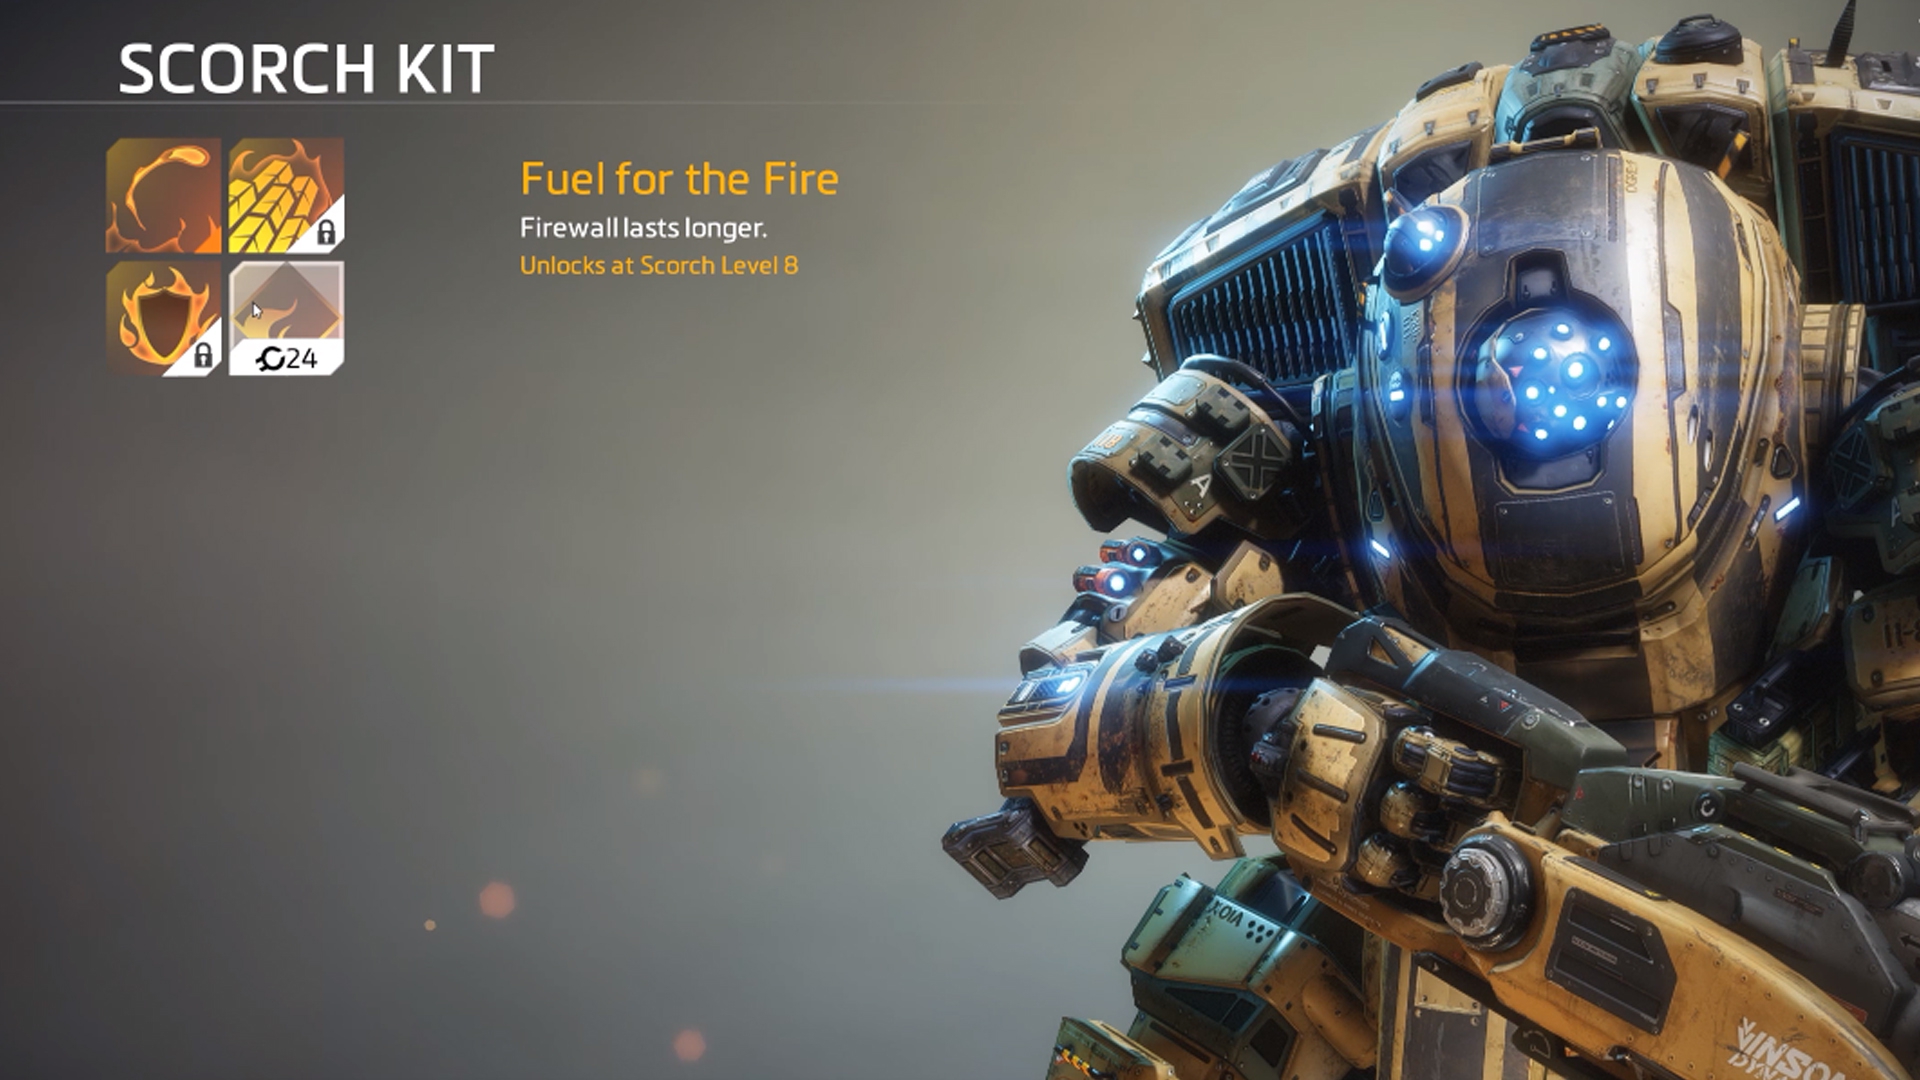 Scorch Kit - Fuel for the Fire